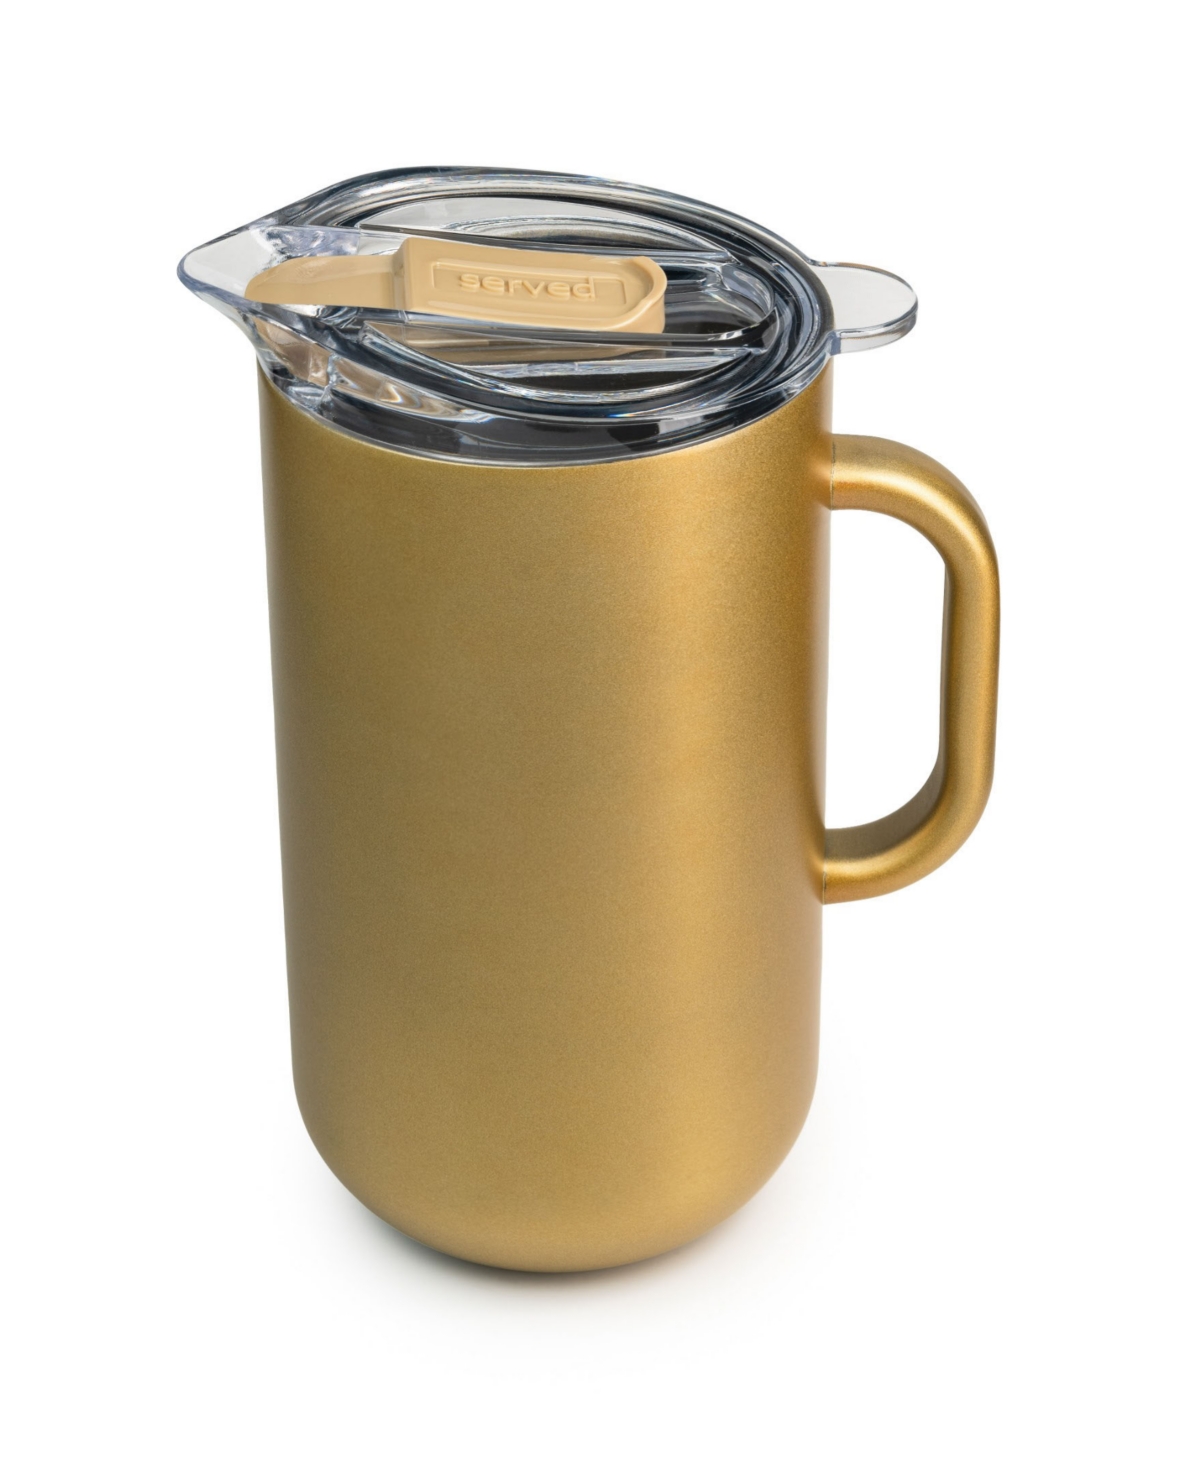 Served Vacuum-insulated Double-walled Copper-lined Stainless Steel Pitcher 2 Liter In Golden